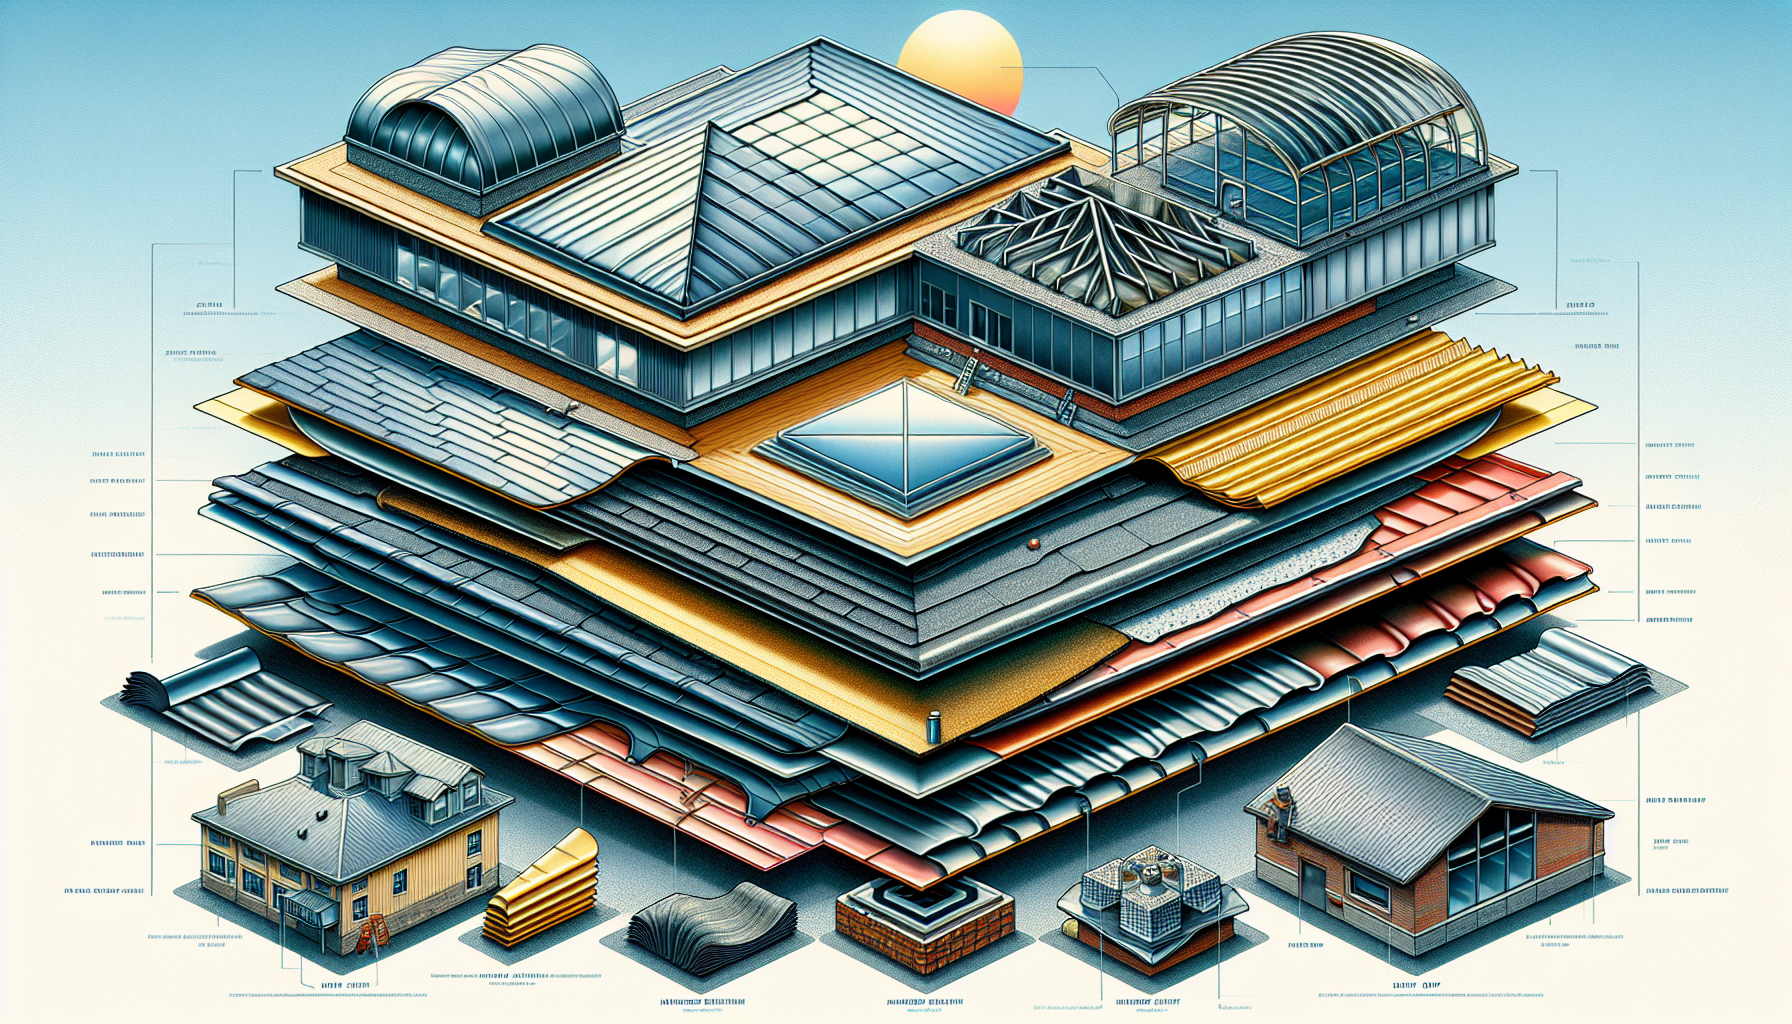 Illustration of various commercial roofing systems